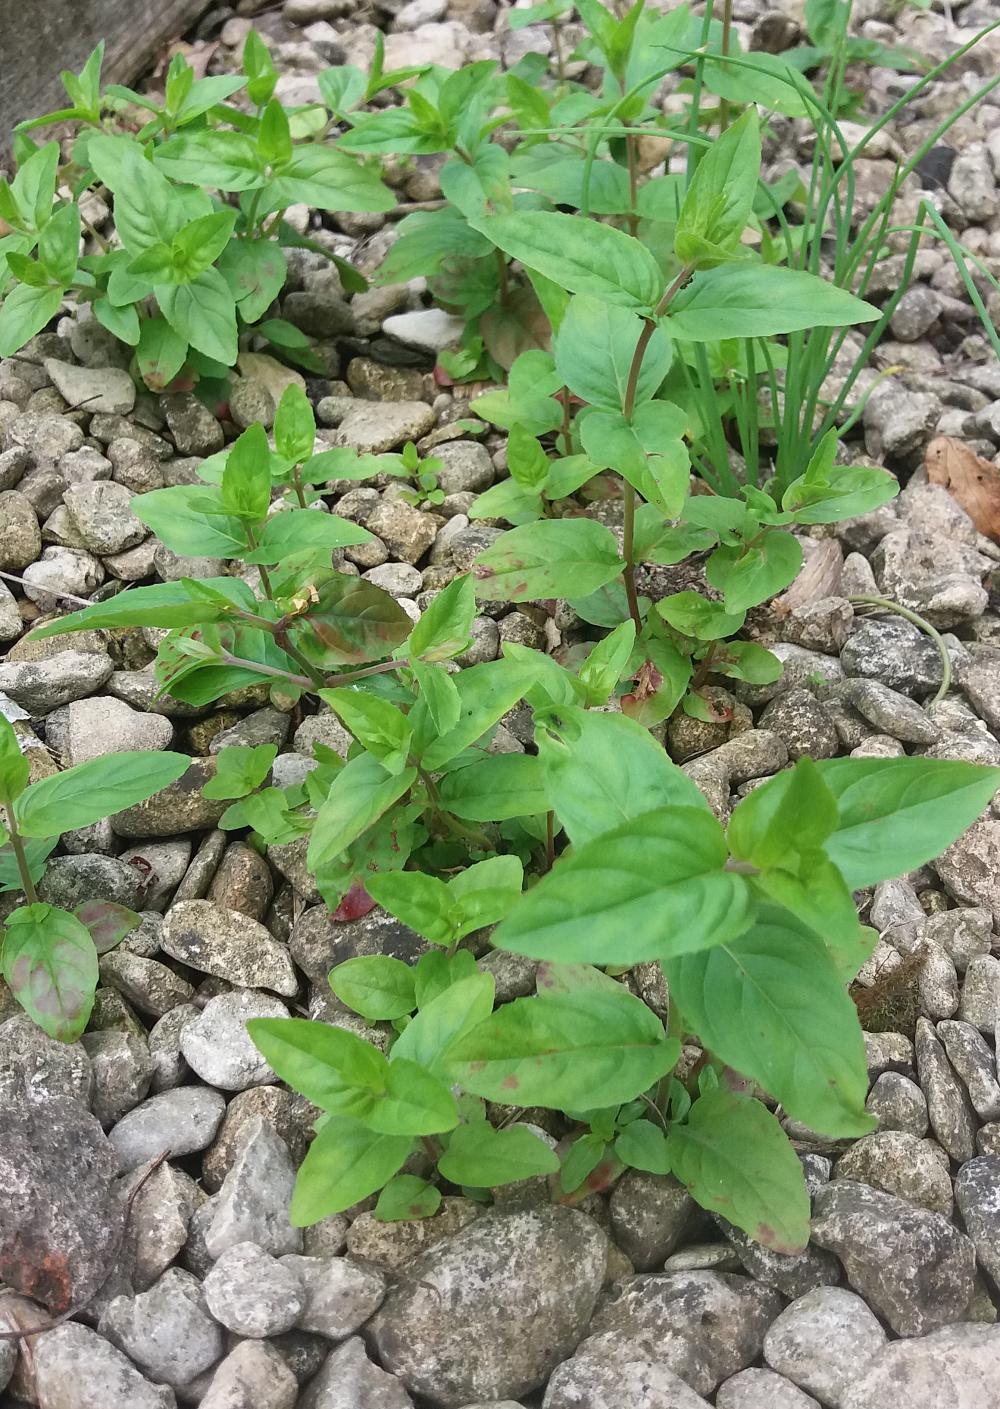 Weedwatch 8: Broad-leaved willowherb